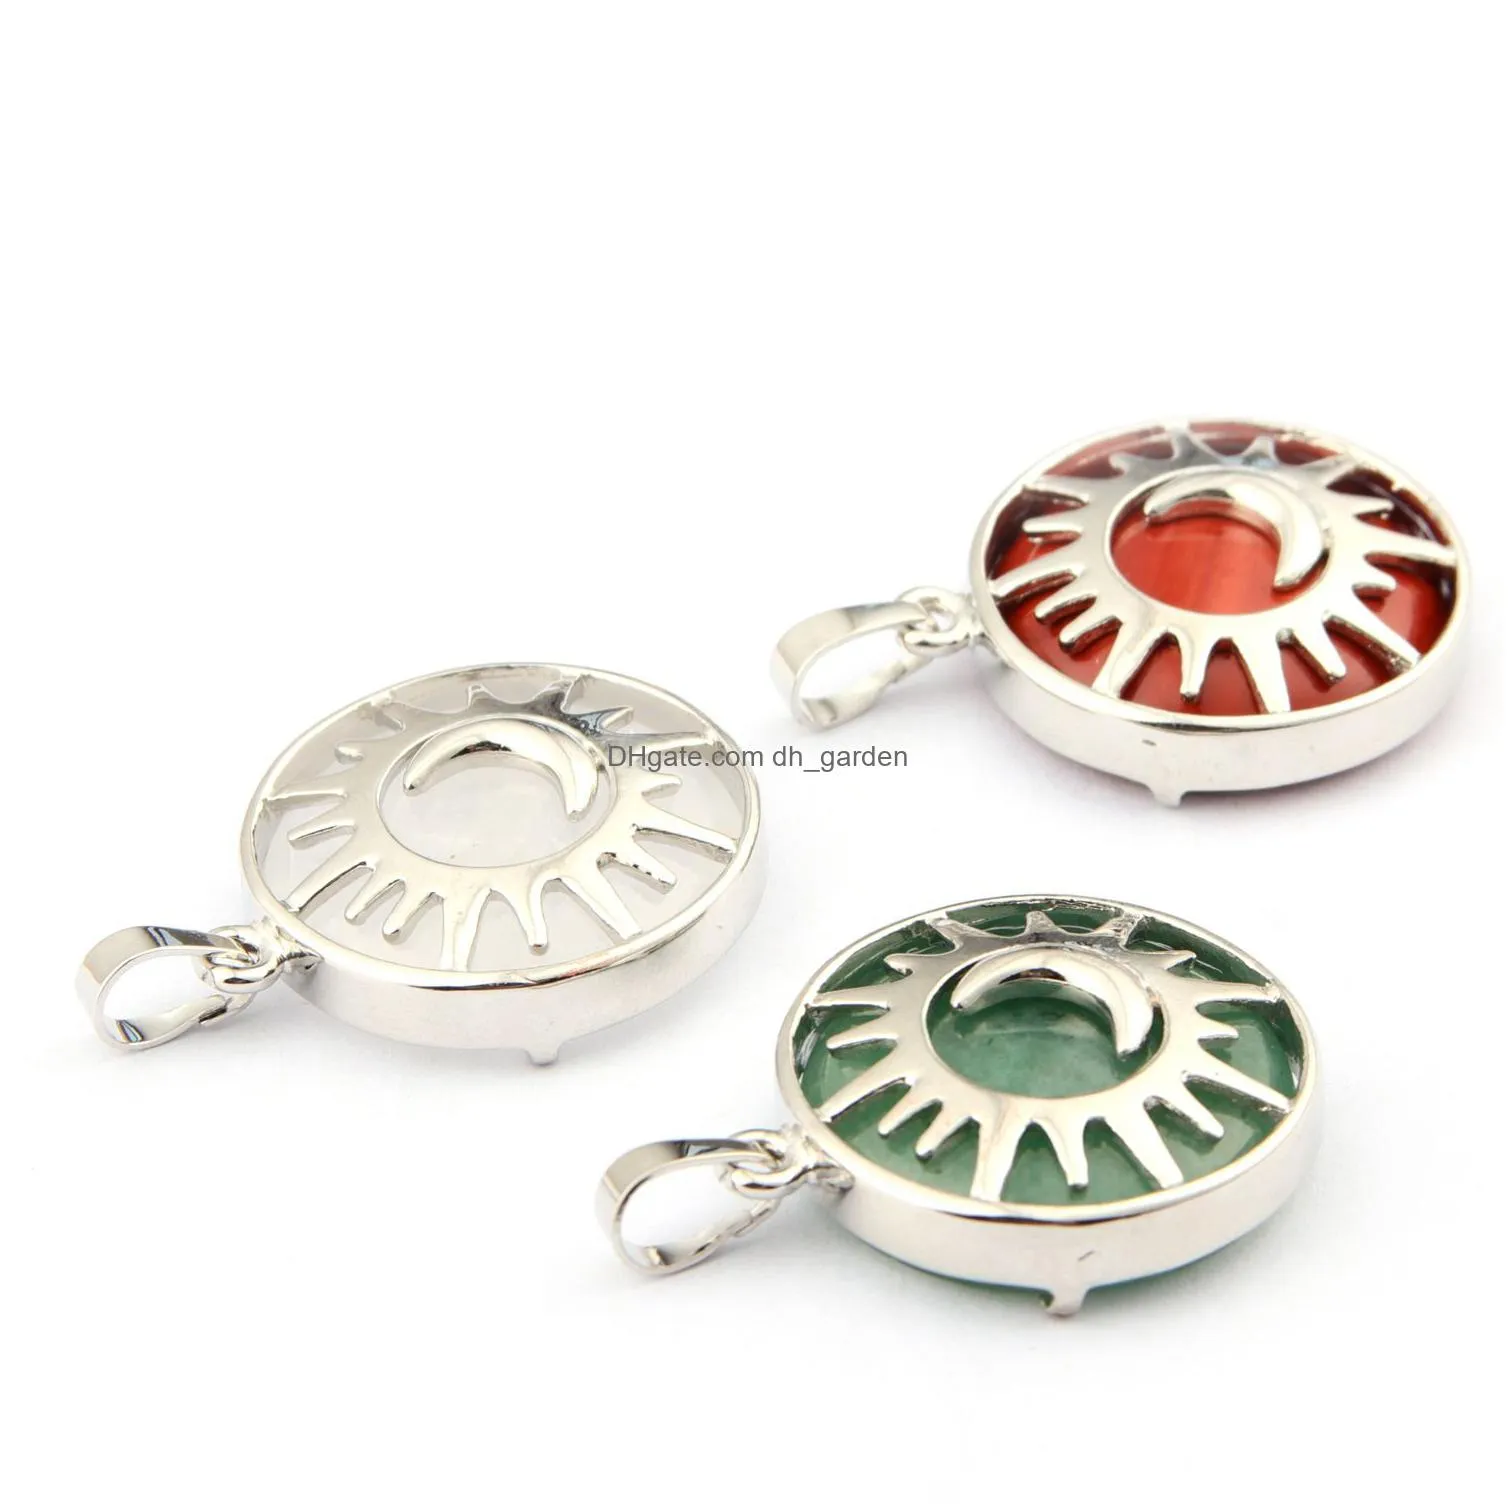 natural stone metal sun moon shape charm healing pendant for necklace jewelry making women earring